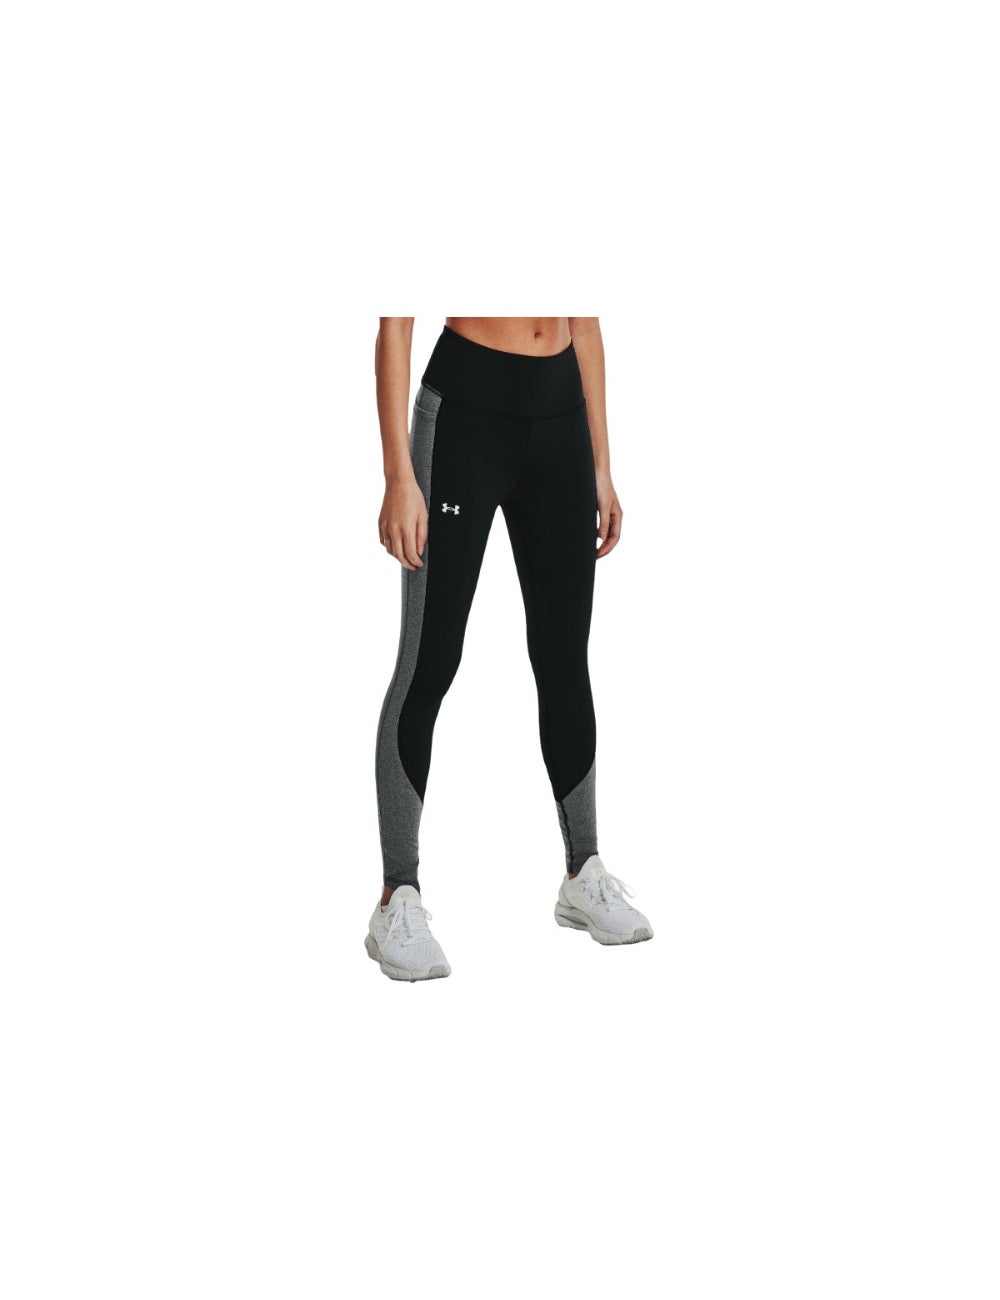 Under Armour Women's Cosy Blocked Tights (Black/White, Size L